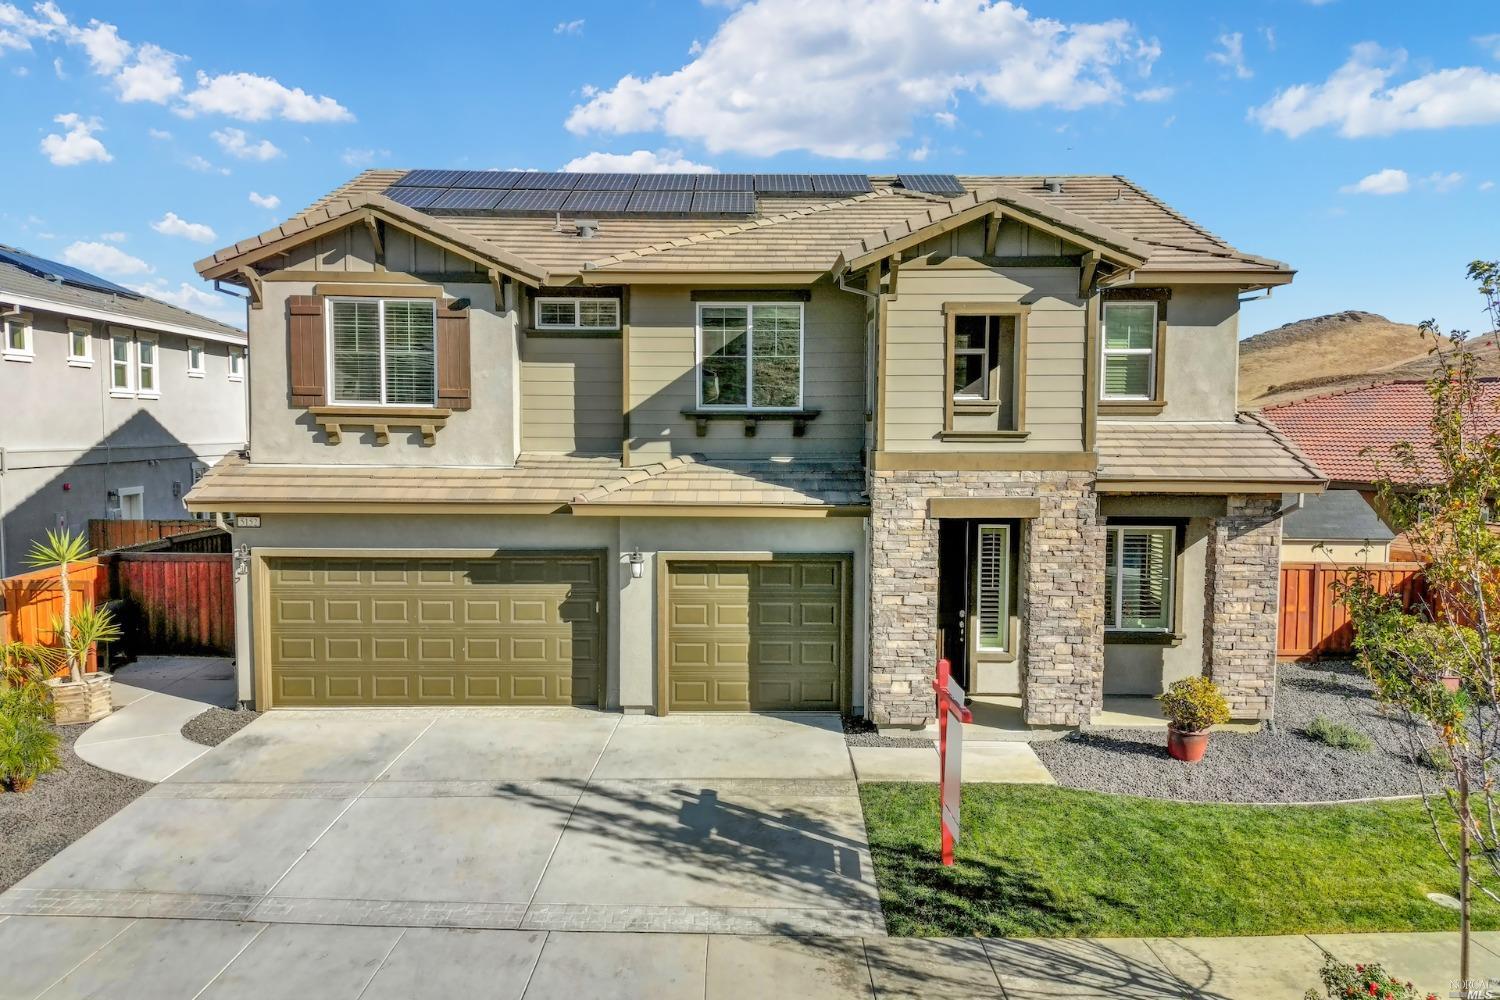 This beautiful home nestled in the Cordelia Hills area of Fairfield is a 5 Bedroom,(Master and Jr Su